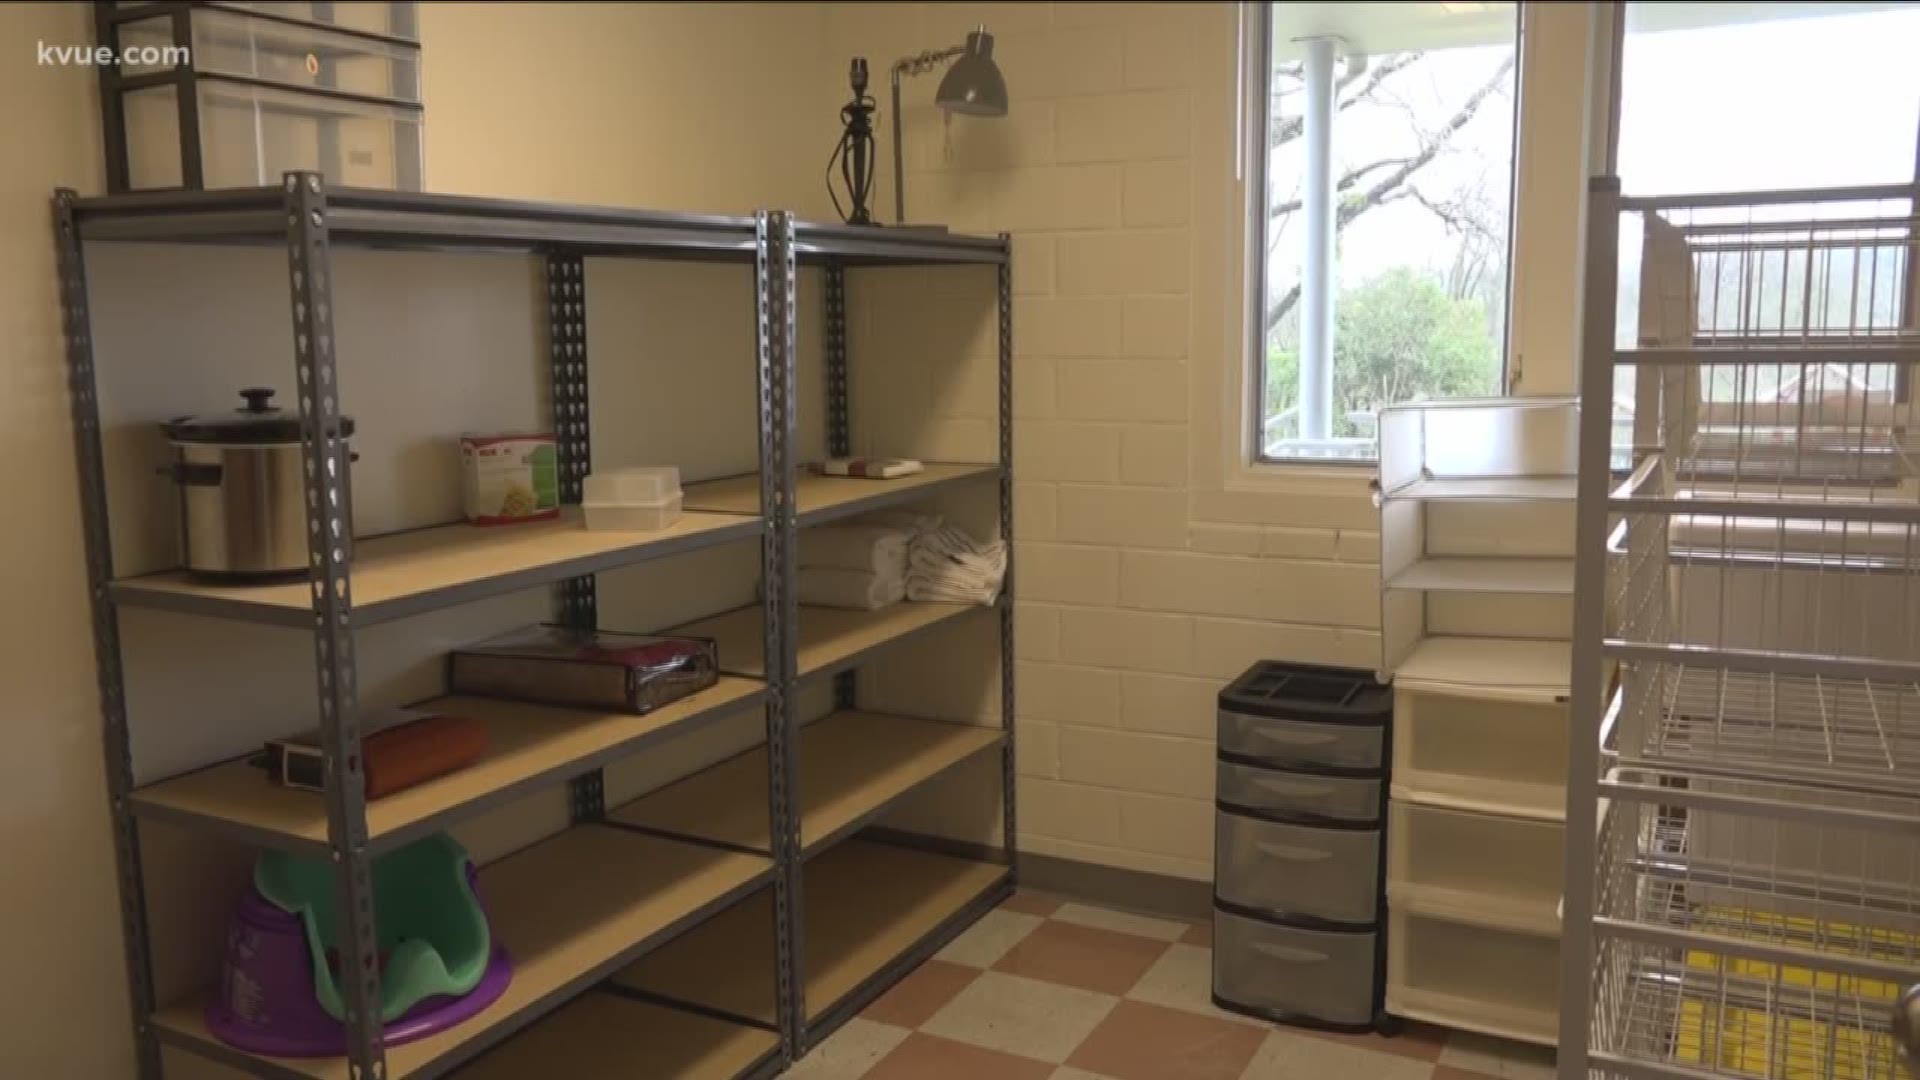 Before you start your spring cleaning and toss things you don't want out, consider donating them.
KVUE's Leslie Adami is here to explain a local charity's need.